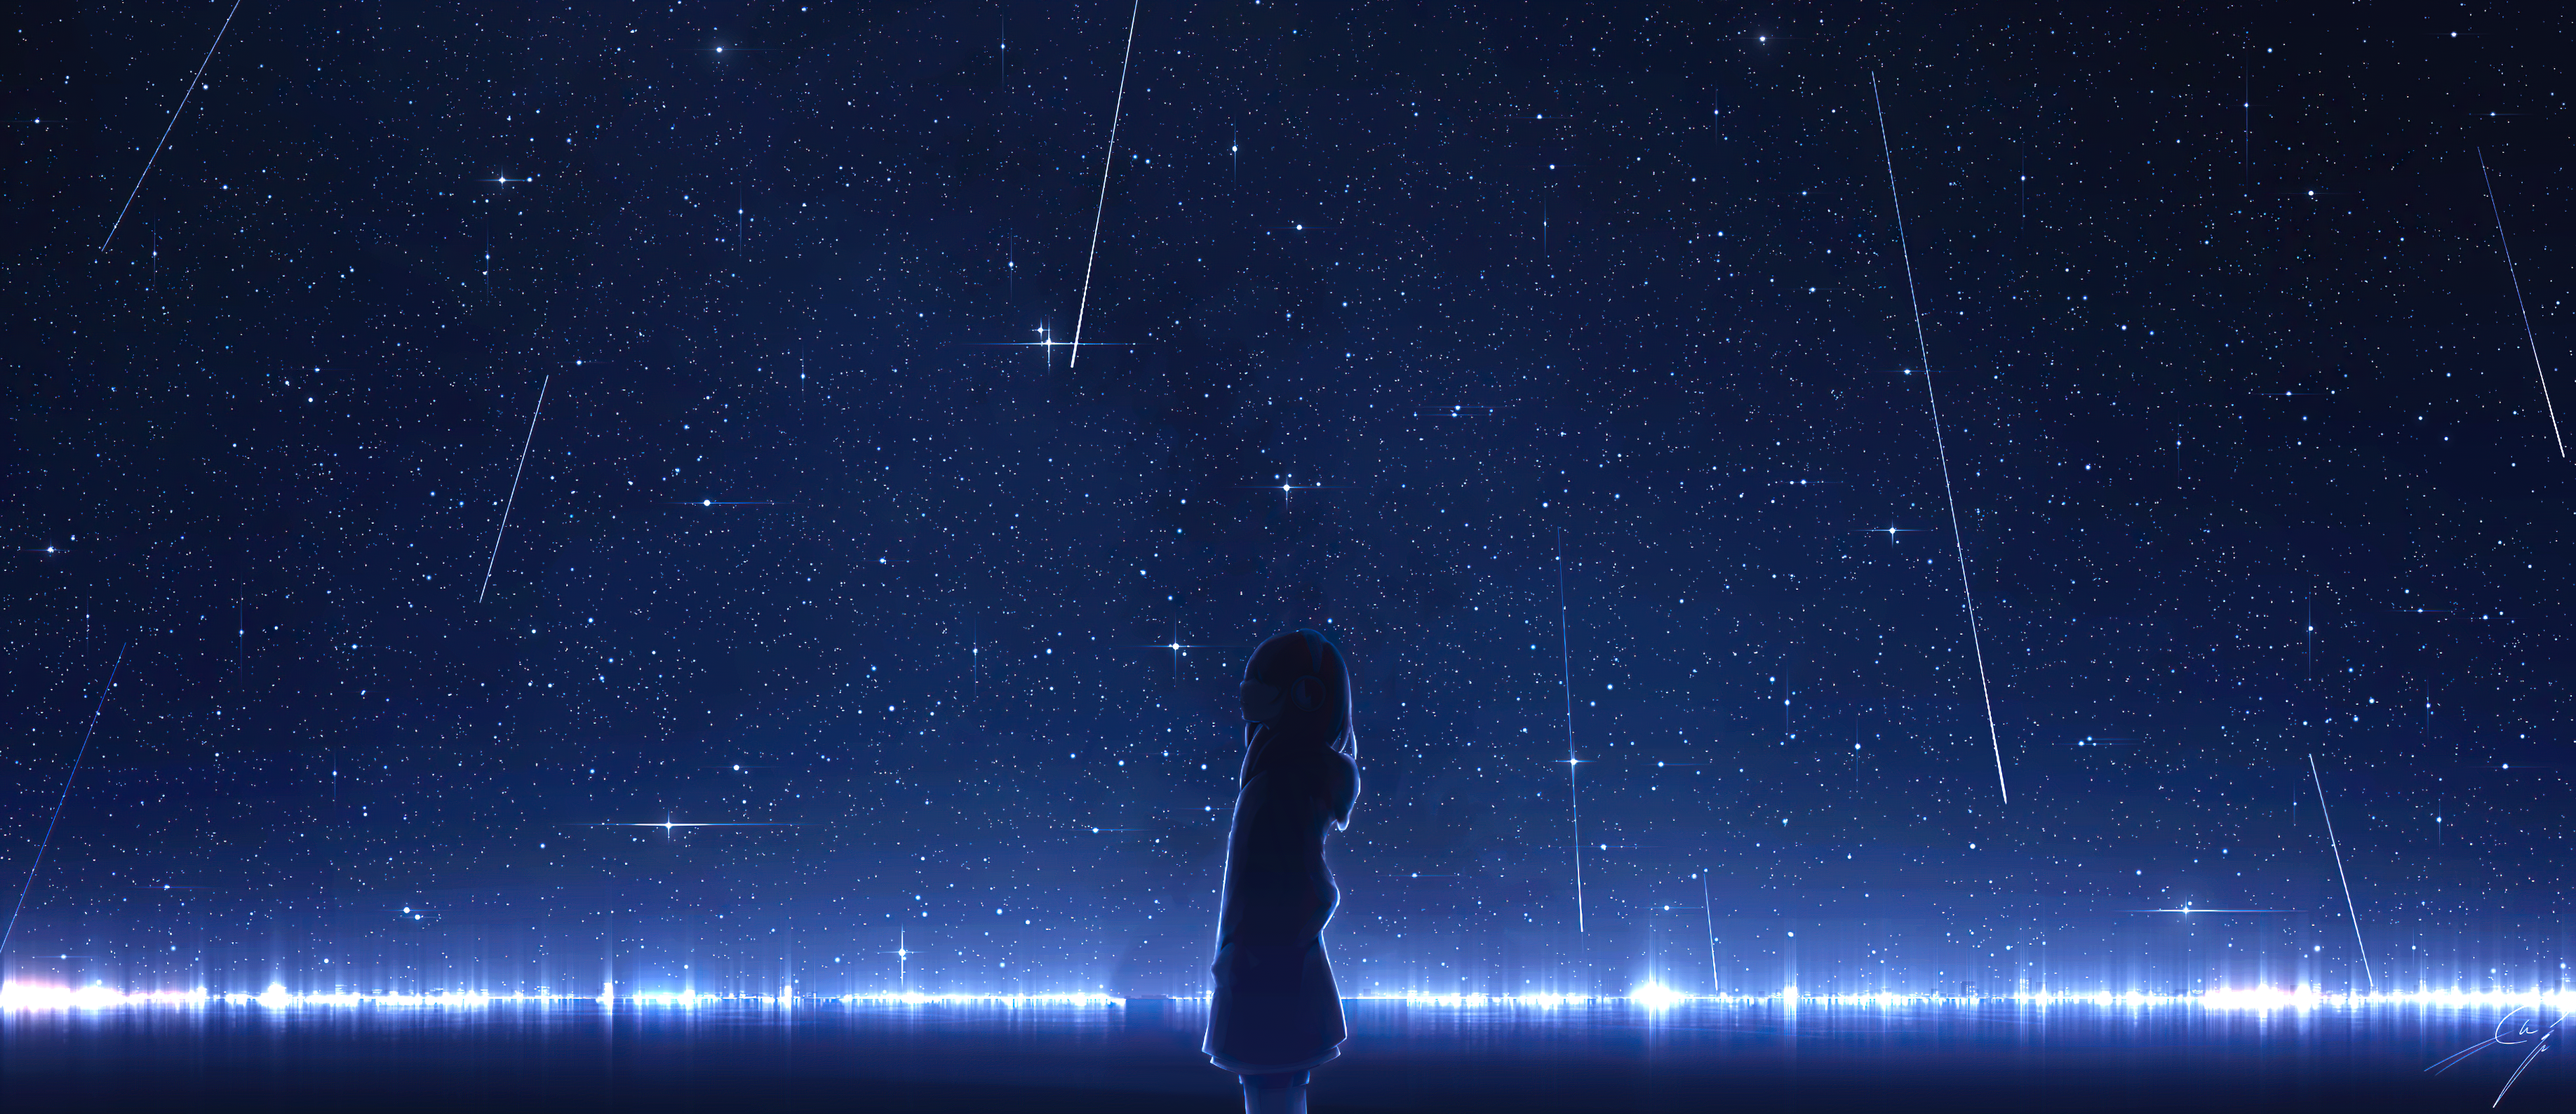 Shooting Star HD Wallpaper and Background